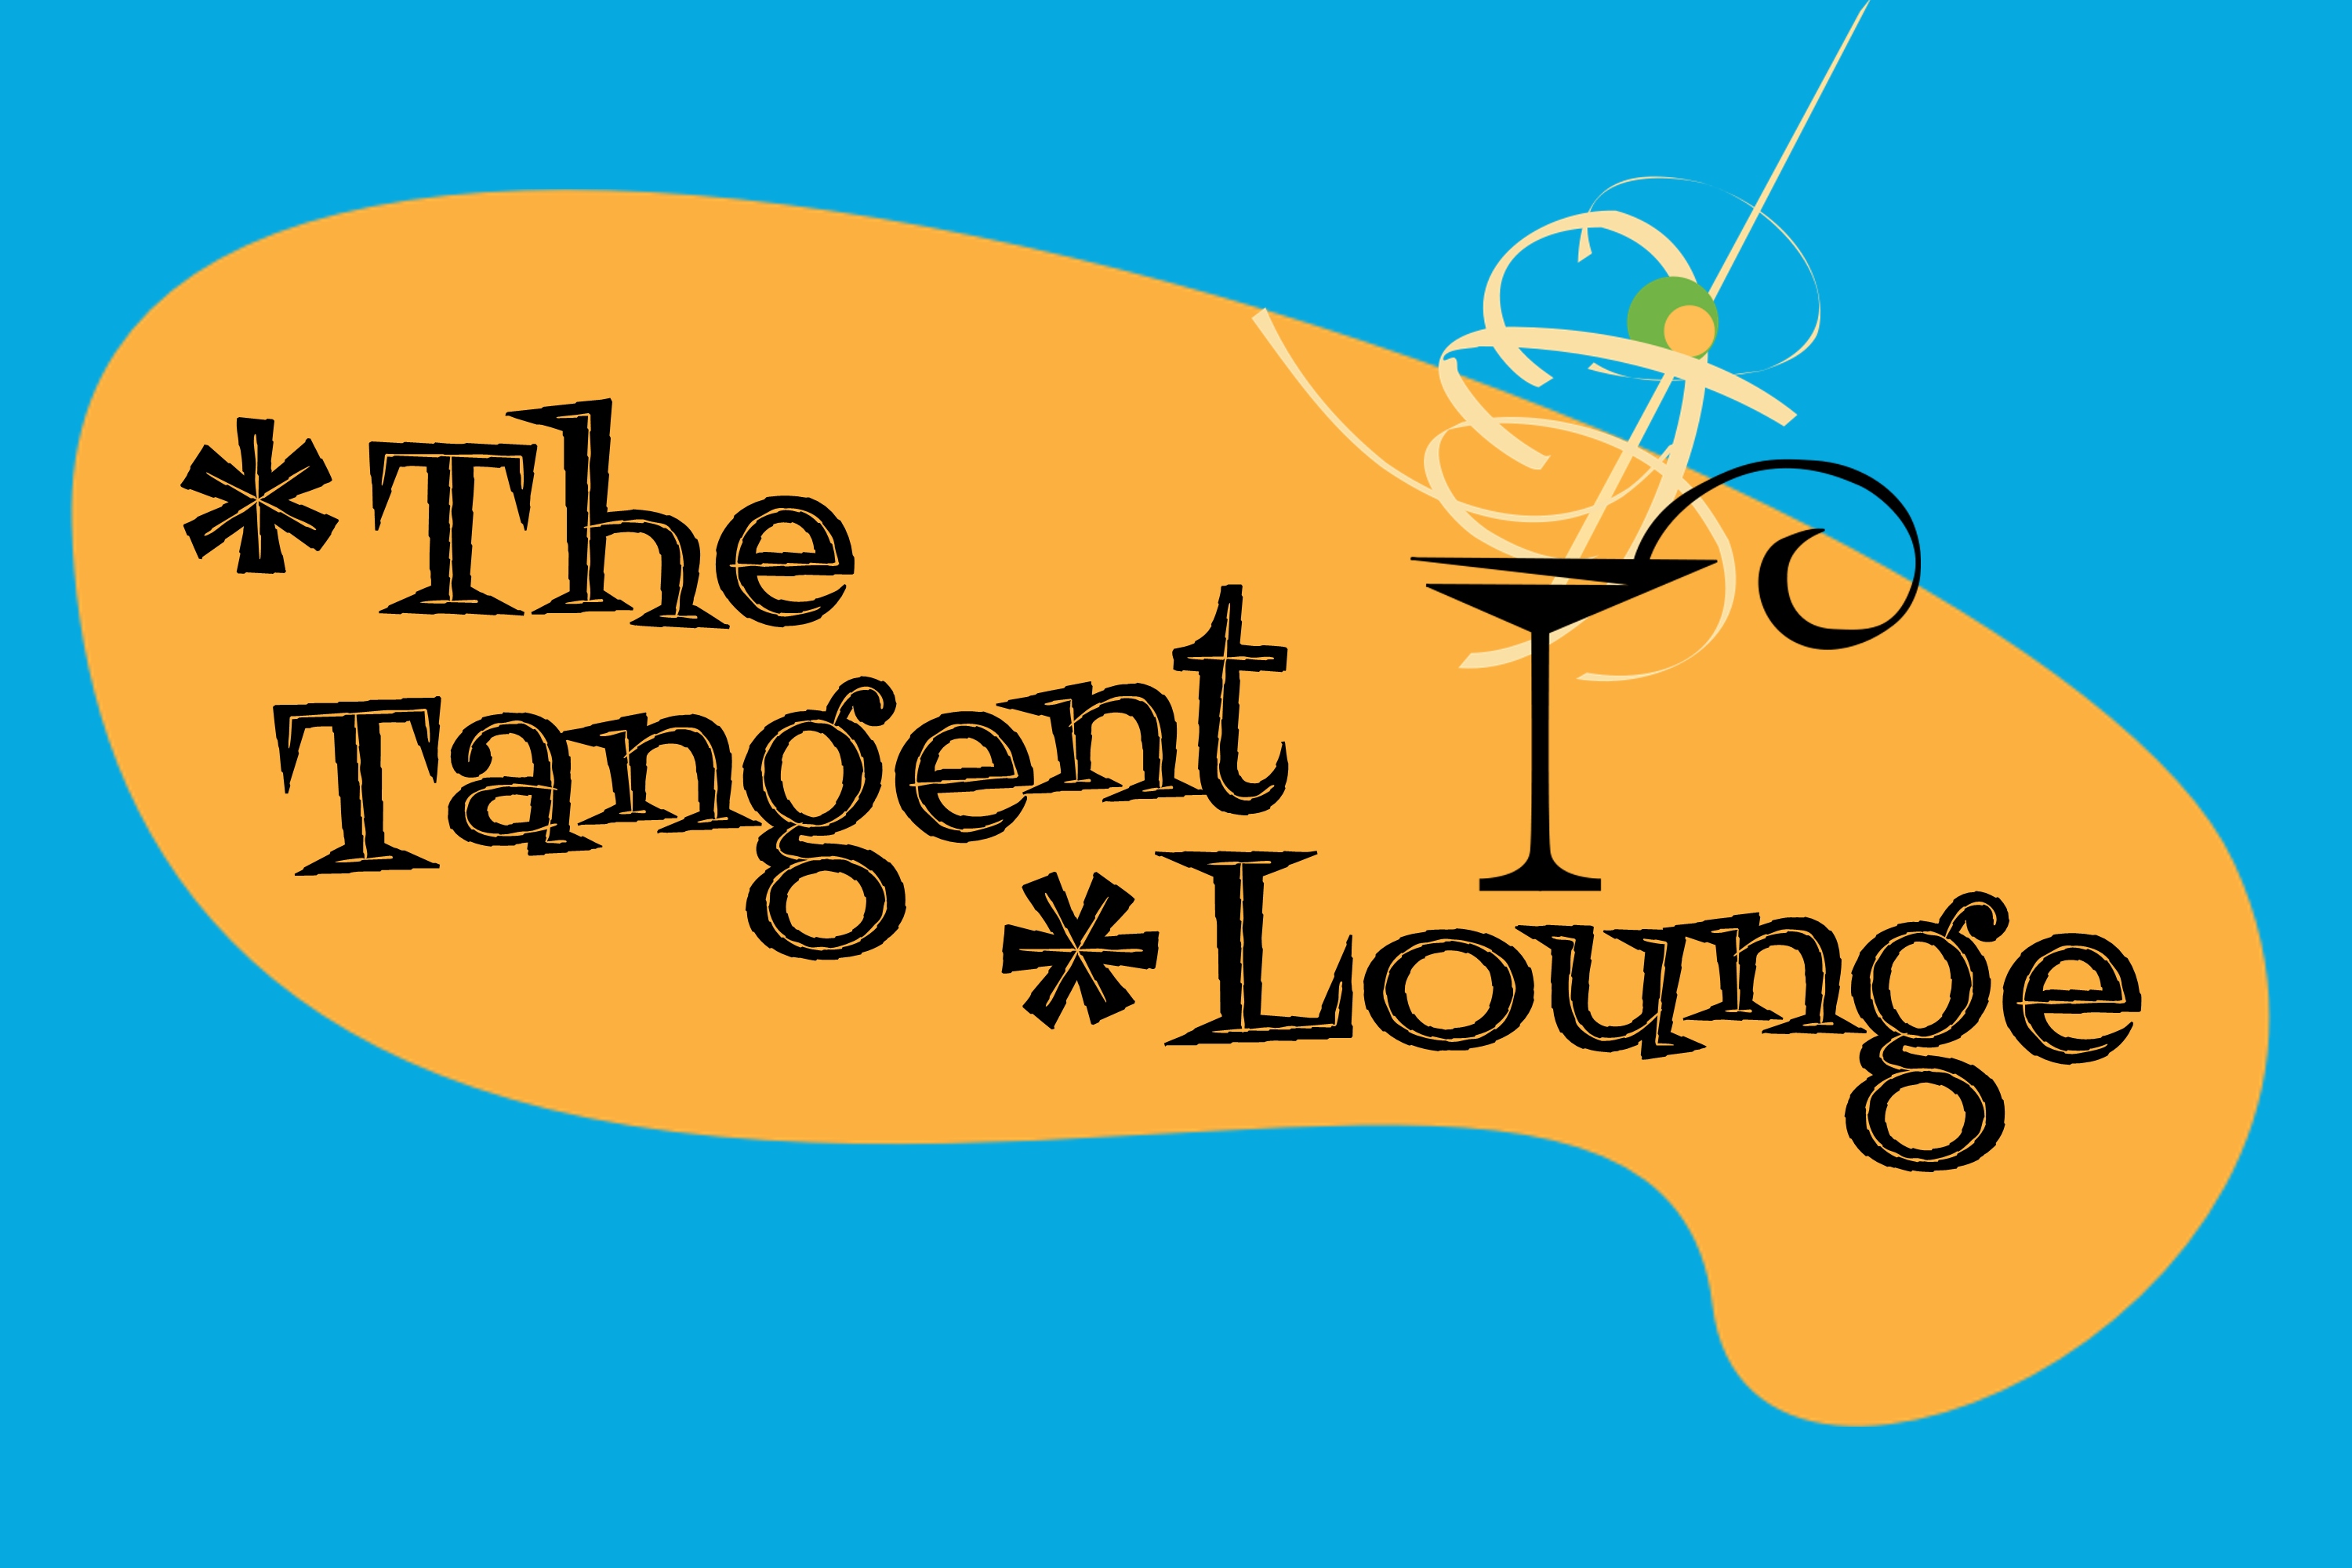 The Tangent Lounge Episode 14 Guest!